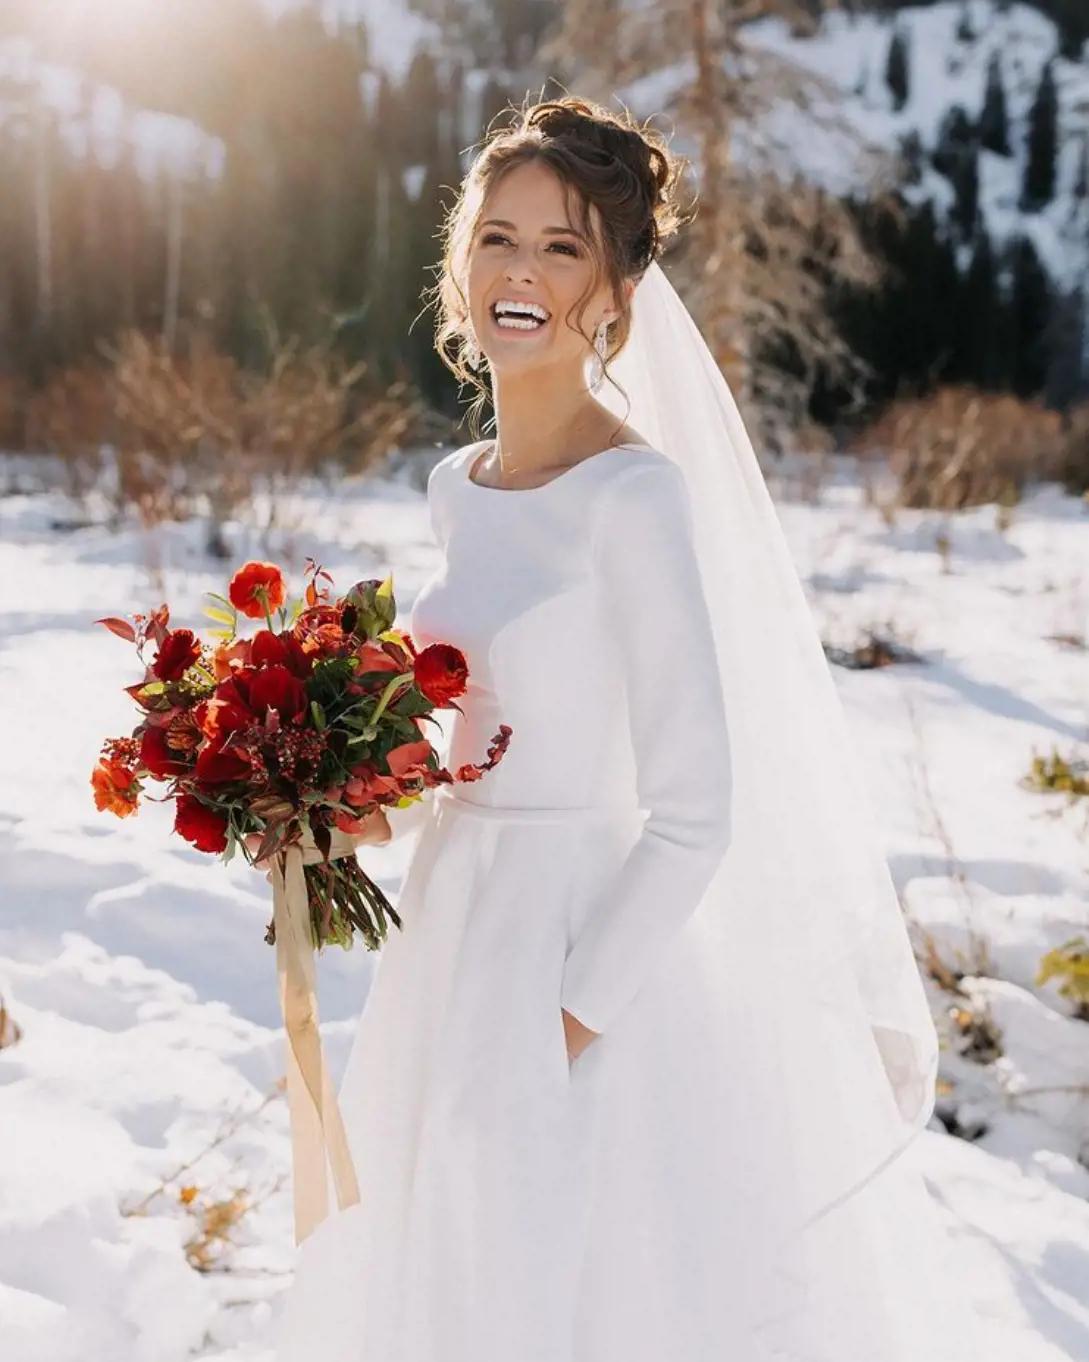 Modest Wedding Gowns Perfect for Spring Image